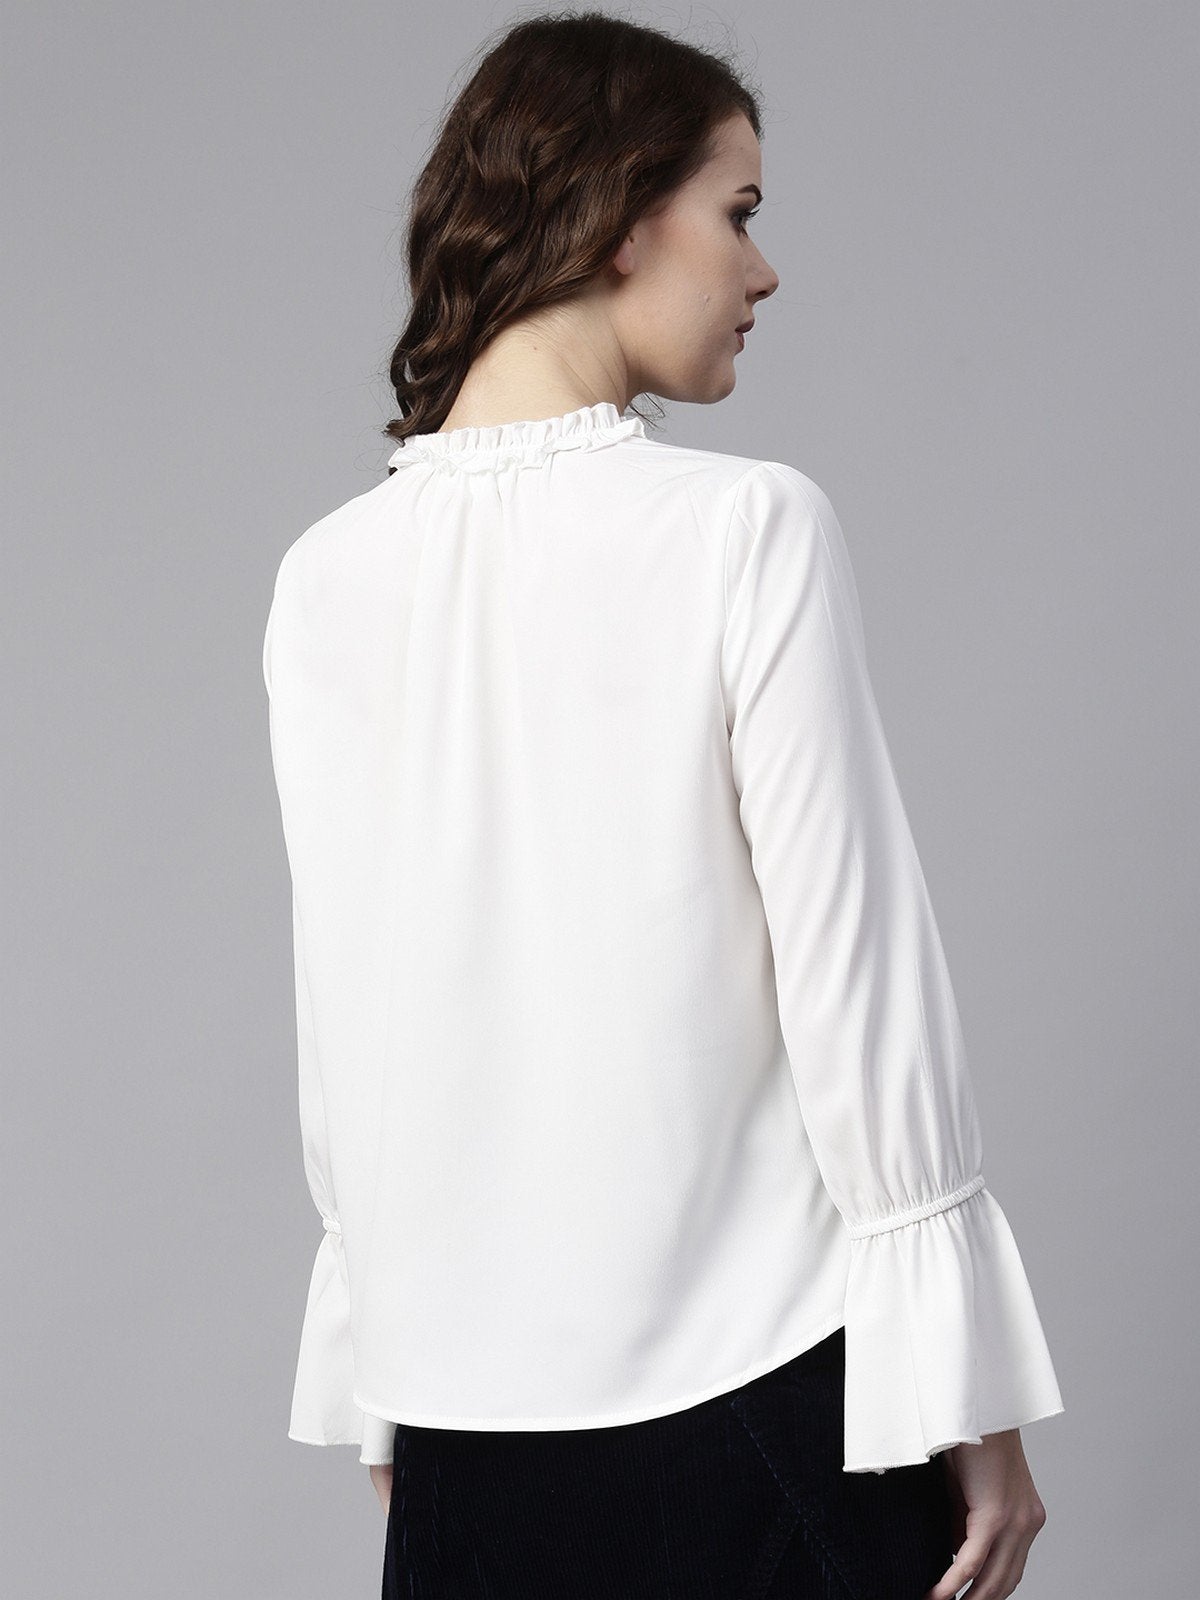 Women's Ruffled Pearl Embellished Collar Top - Pannkh